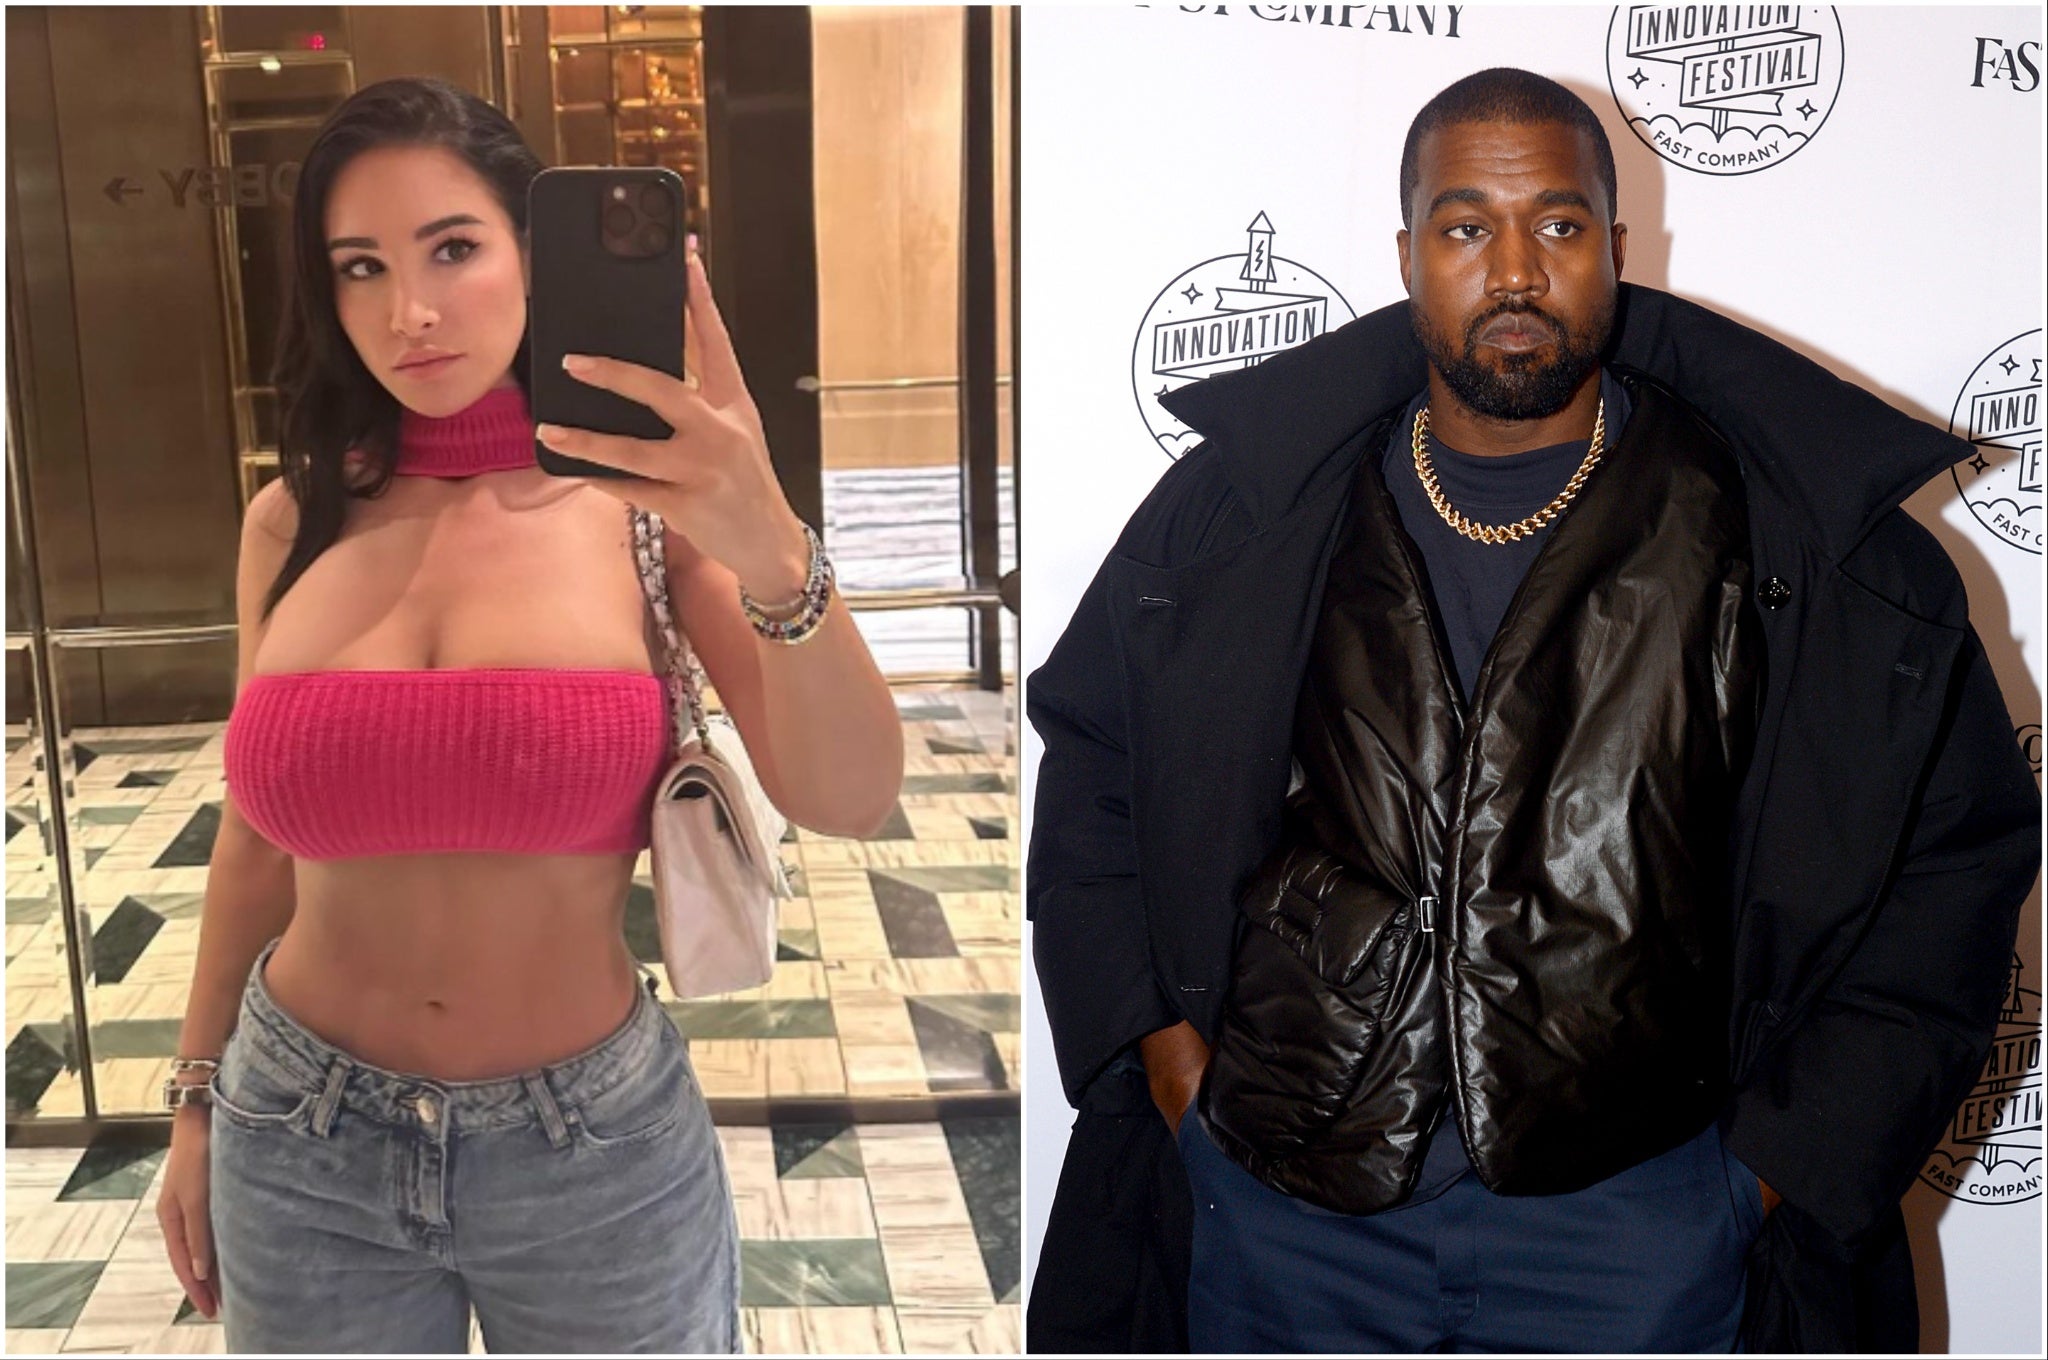 Lauren Pisciotta (left) is suing Kanye West for wrongful termination and sexual harassment